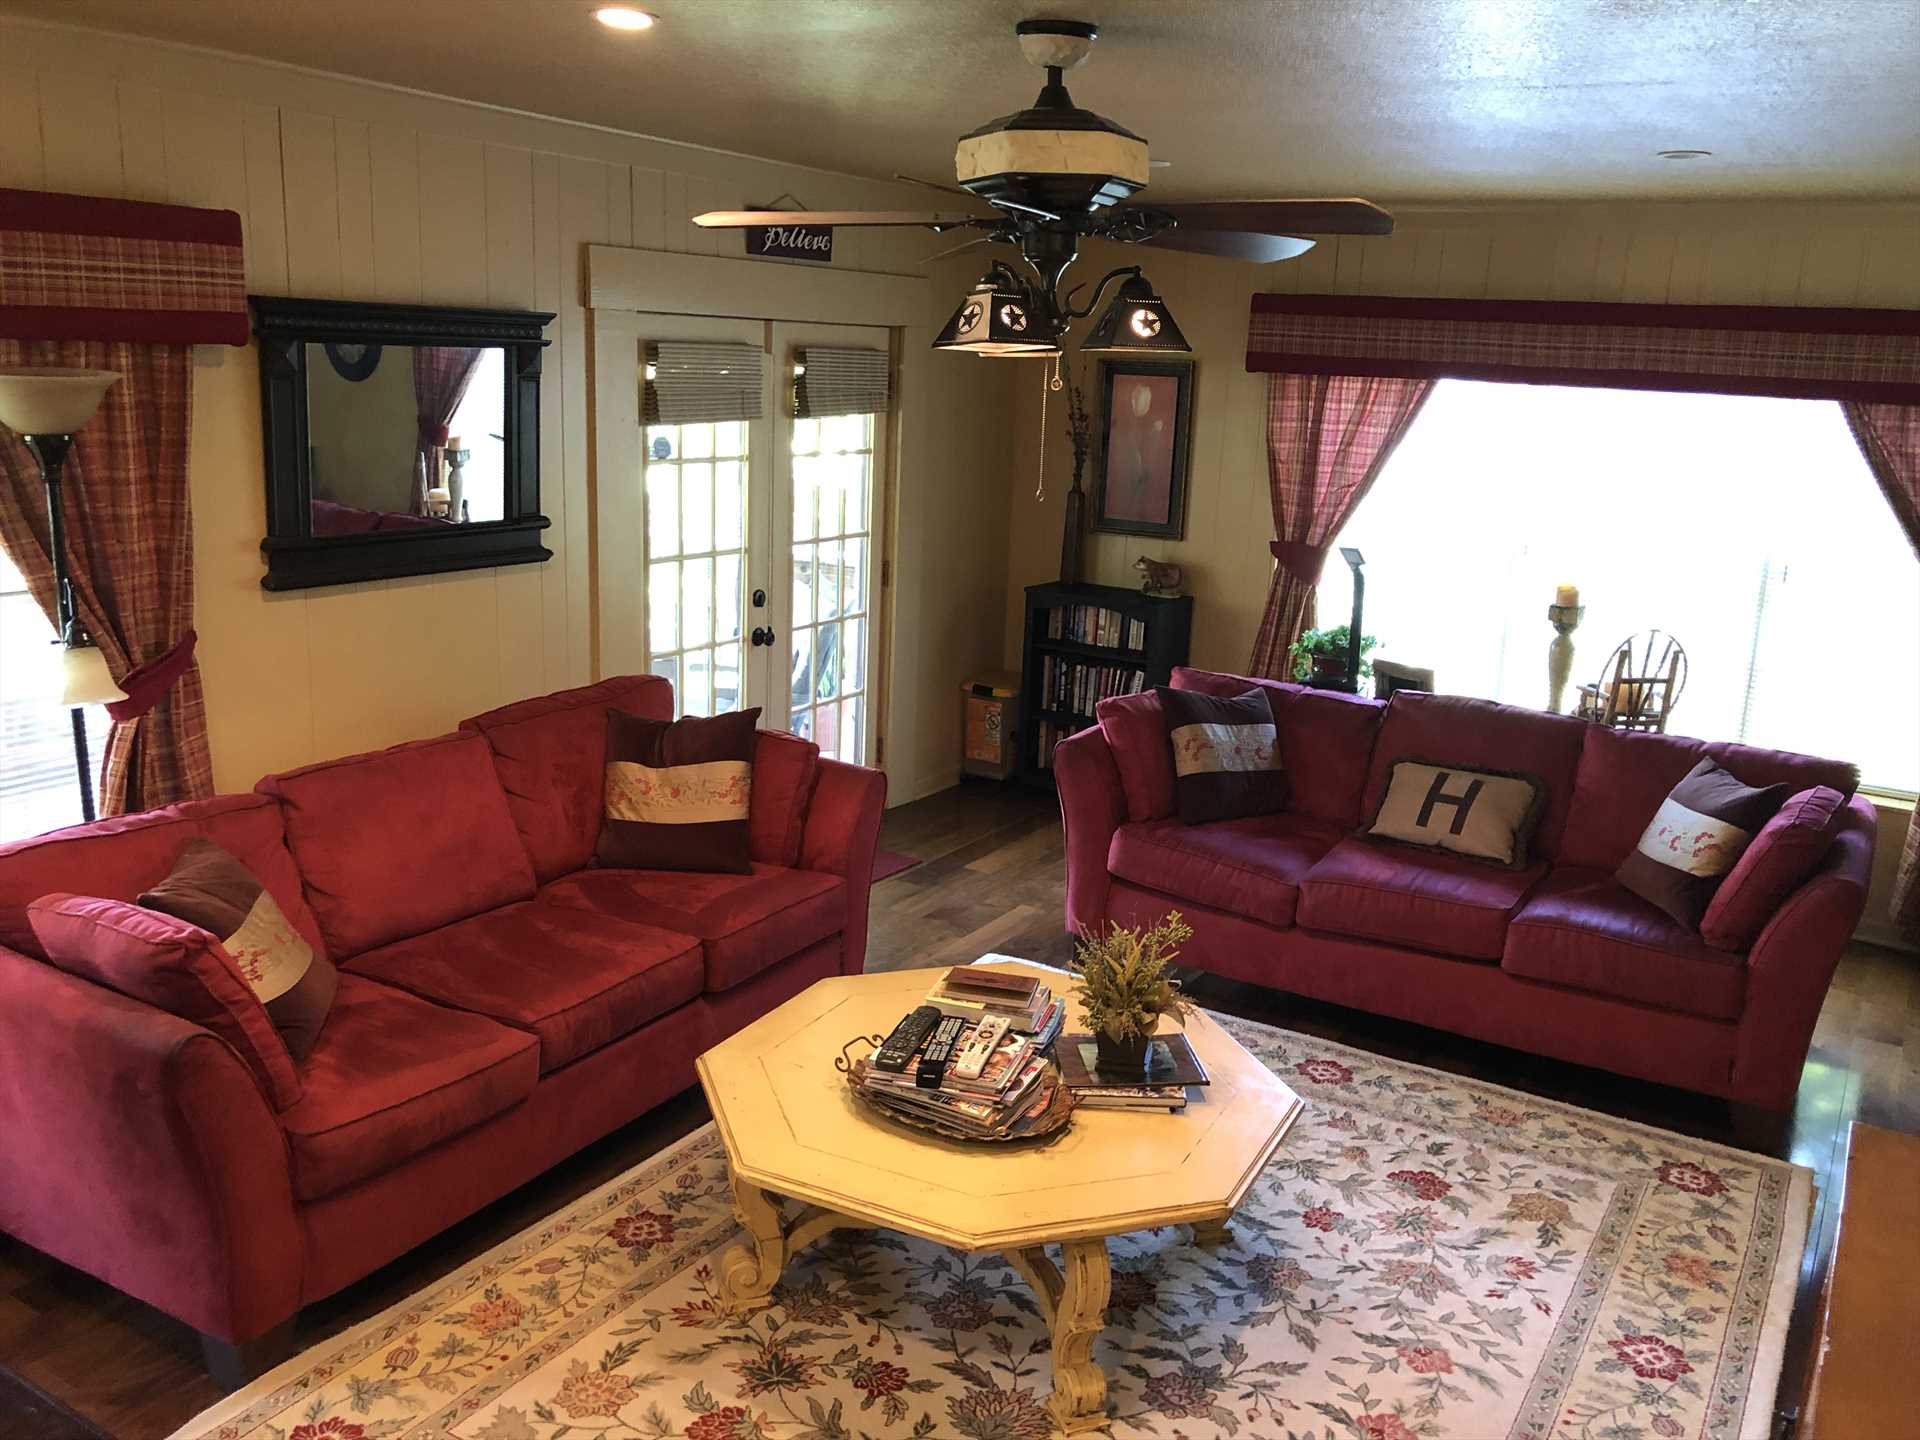                                                 Central air and heating, along with ceiling fans, assure every moment is comfortable here. The living area features a fireplace and cable TV, and there's wireless Internet service everywhere!